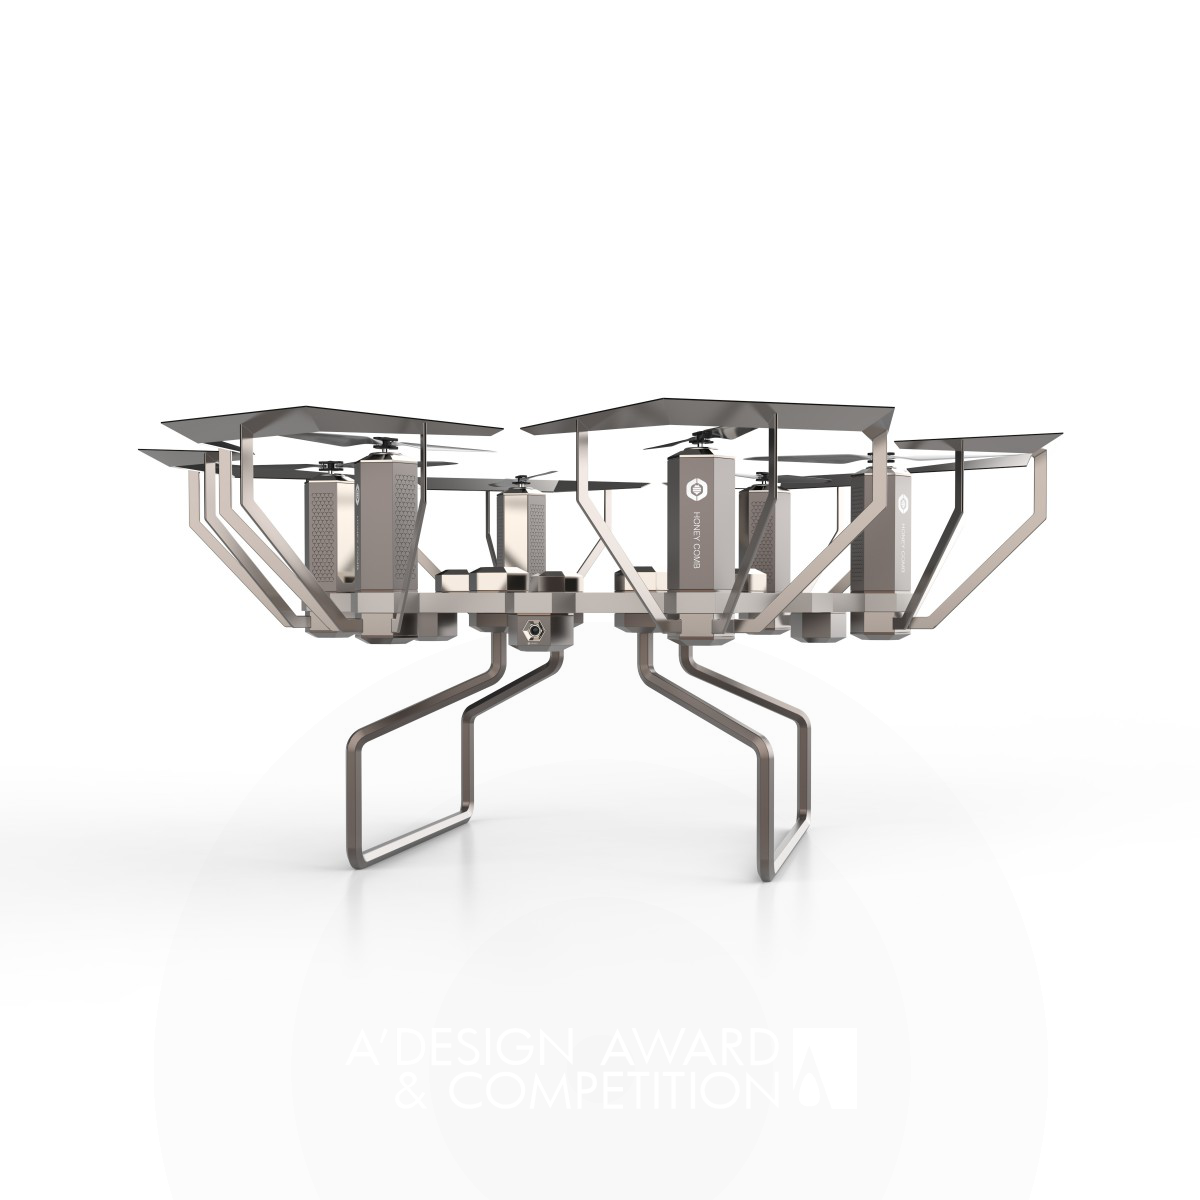 Honeycomb Modular Multifunctional Drone by Guangpeng Yue Silver Robotics, Automaton and Automation Design Award Winner 2021 